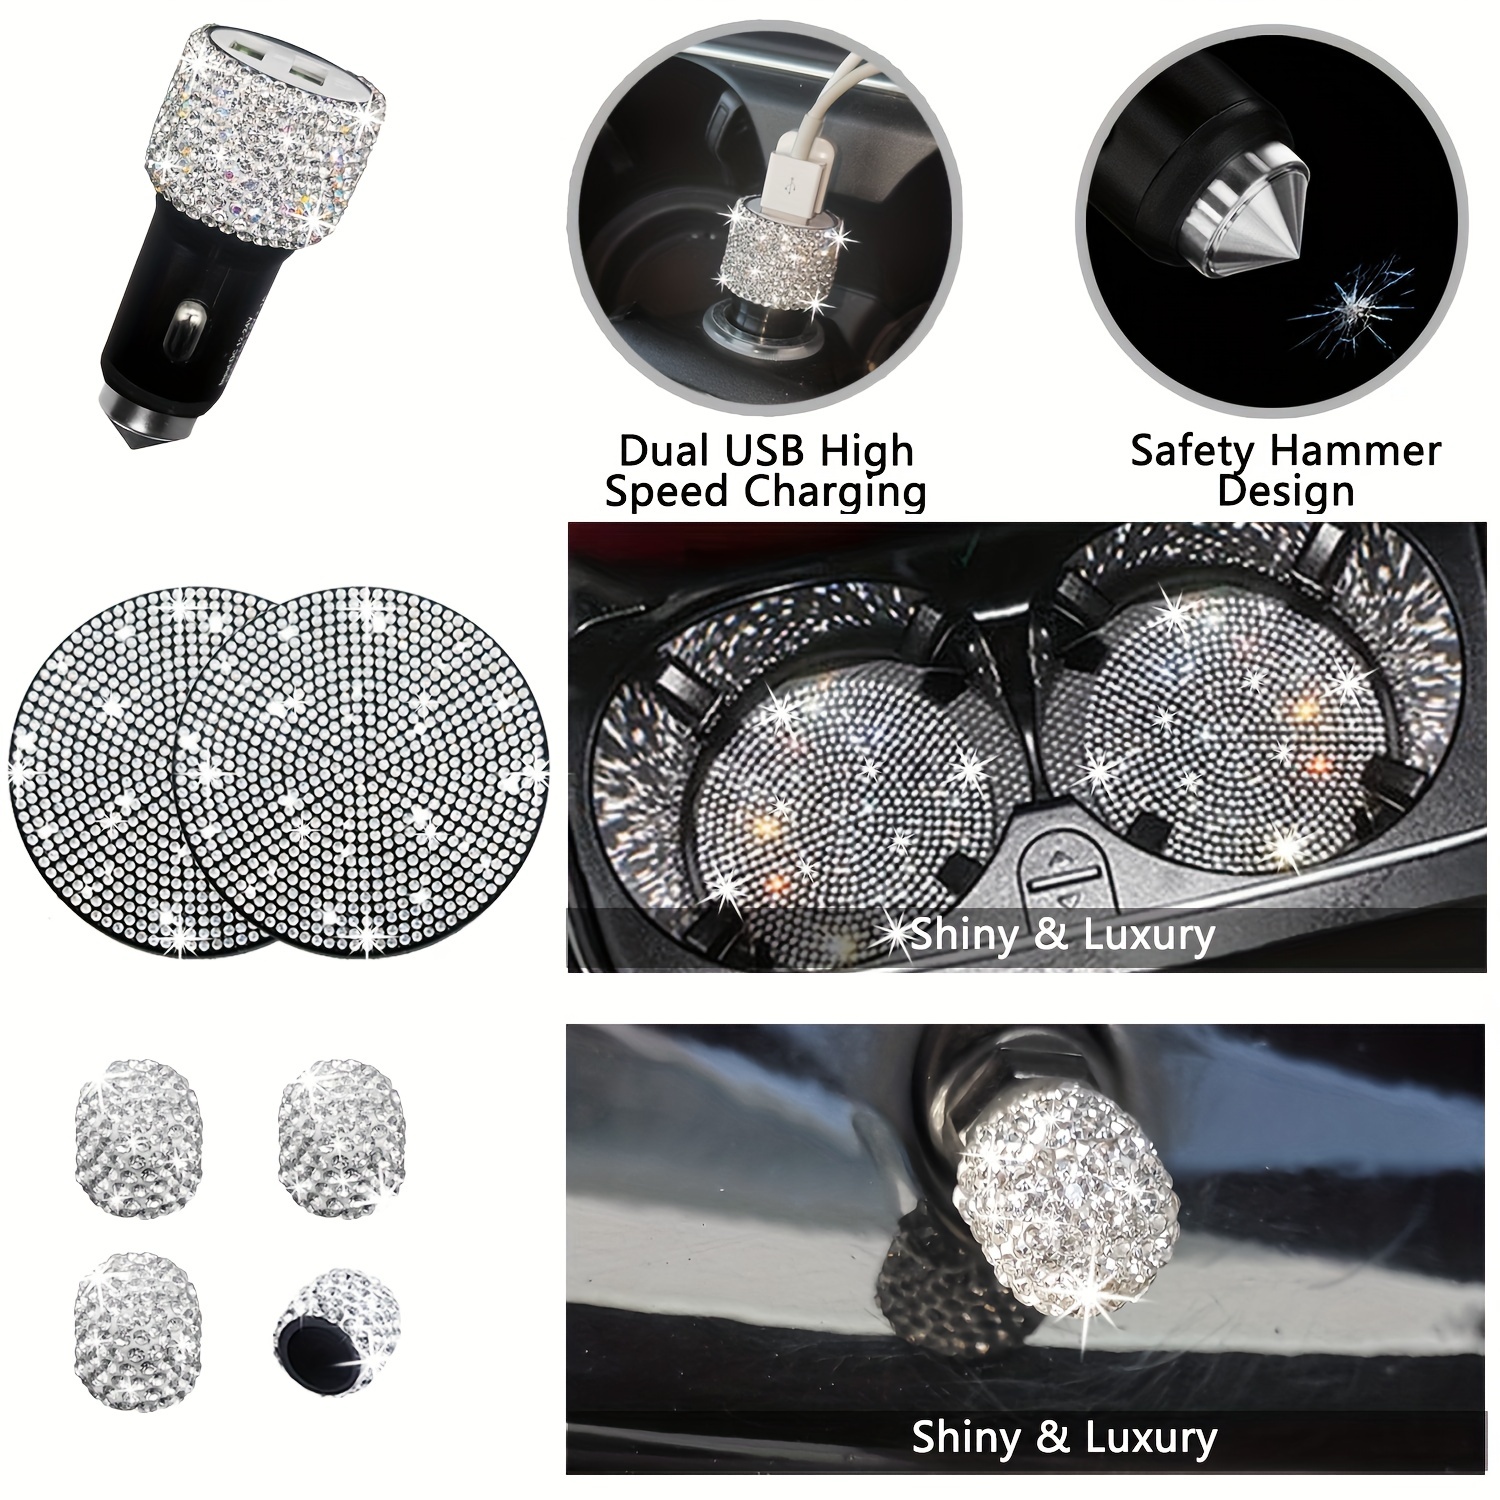 27pcs bling car accessories set for women bling steering wheel covers universal fit 15 inch bling license plate frame phone holder car coasters details 8